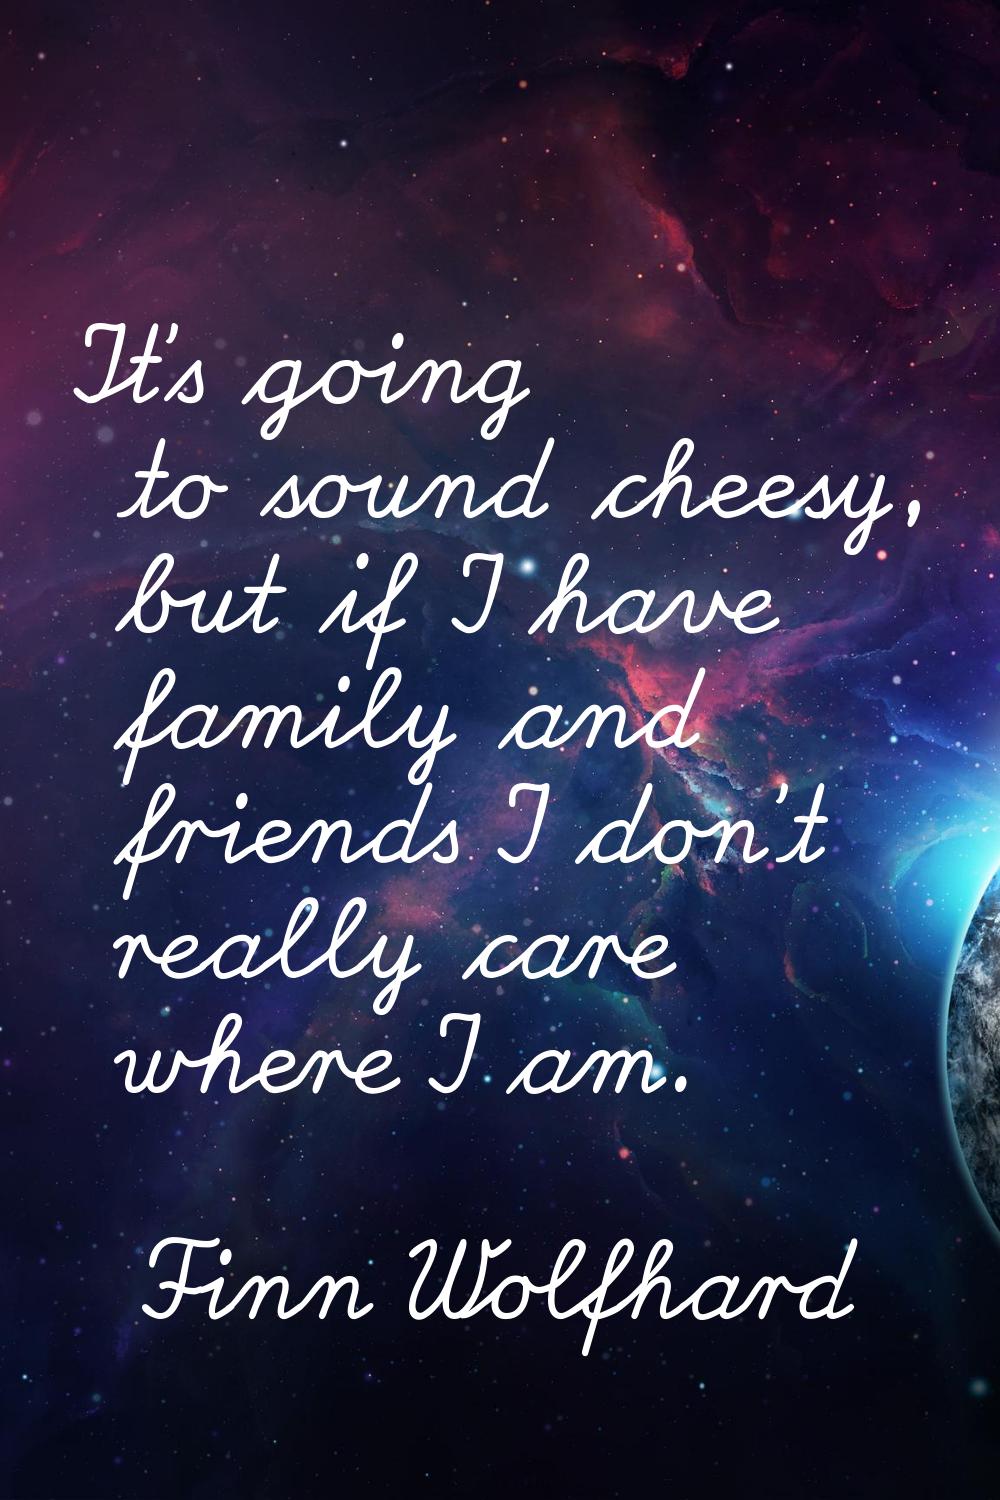 It's going to sound cheesy, but if I have family and friends I don't really care where I am.